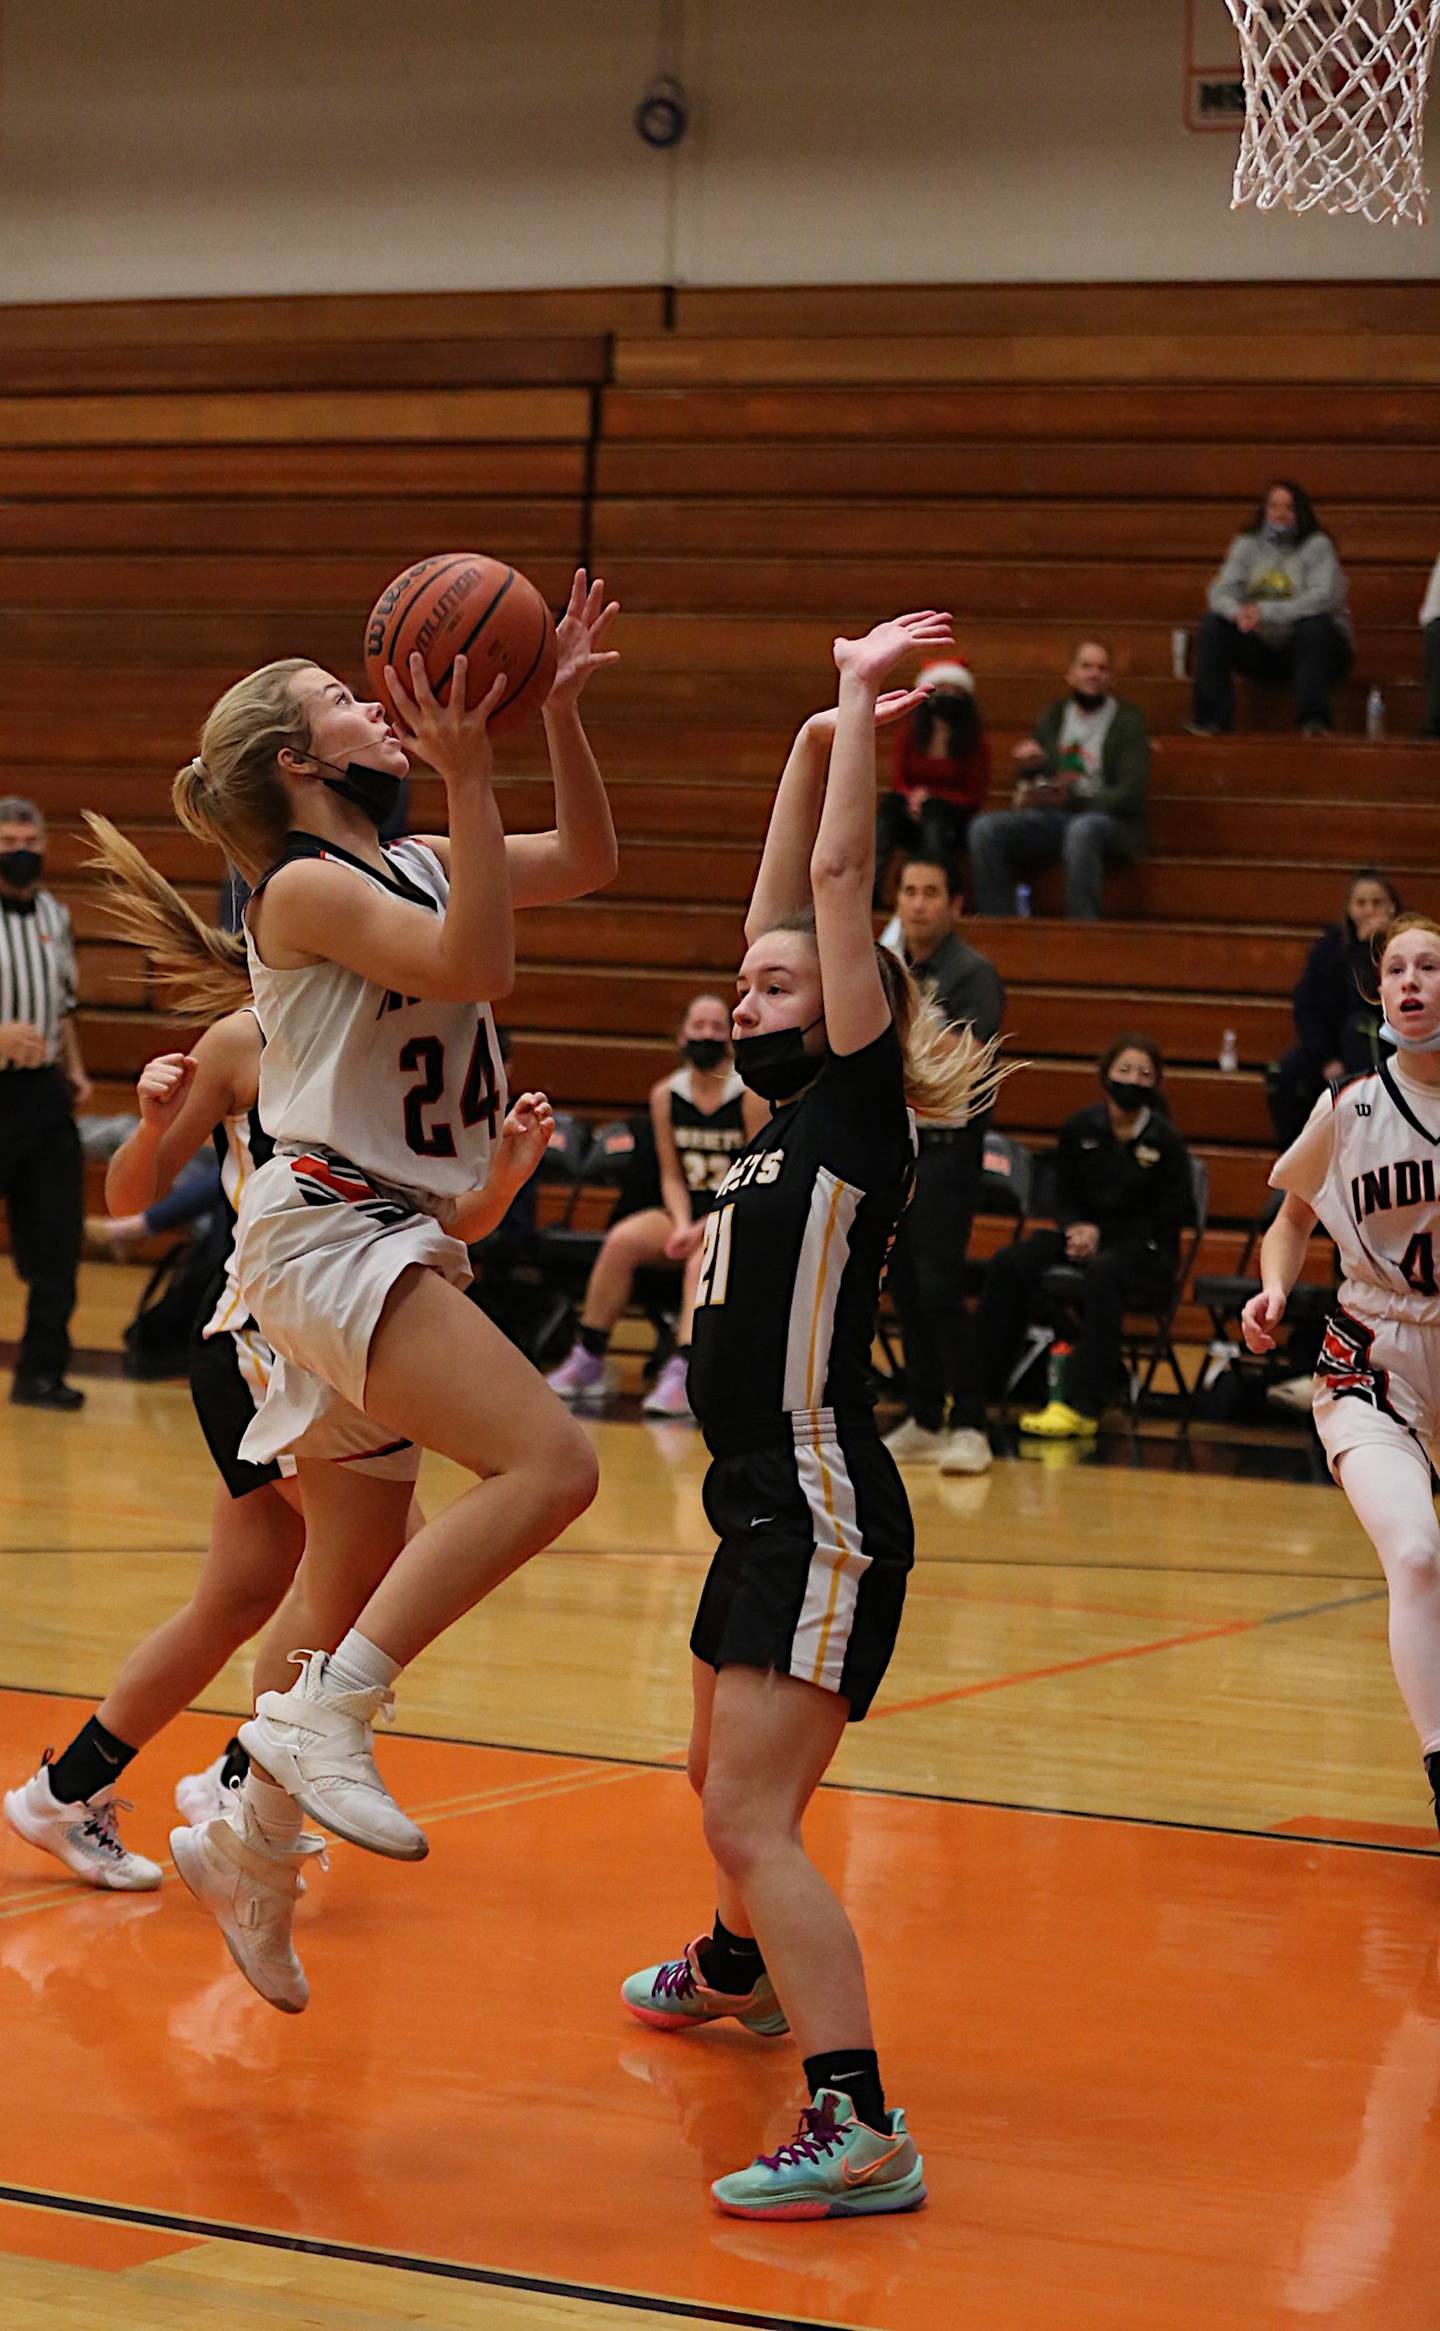 Minooka's Alyson Riley drives to the basket Saturday during a 38-33 loss to Hinsdale South.